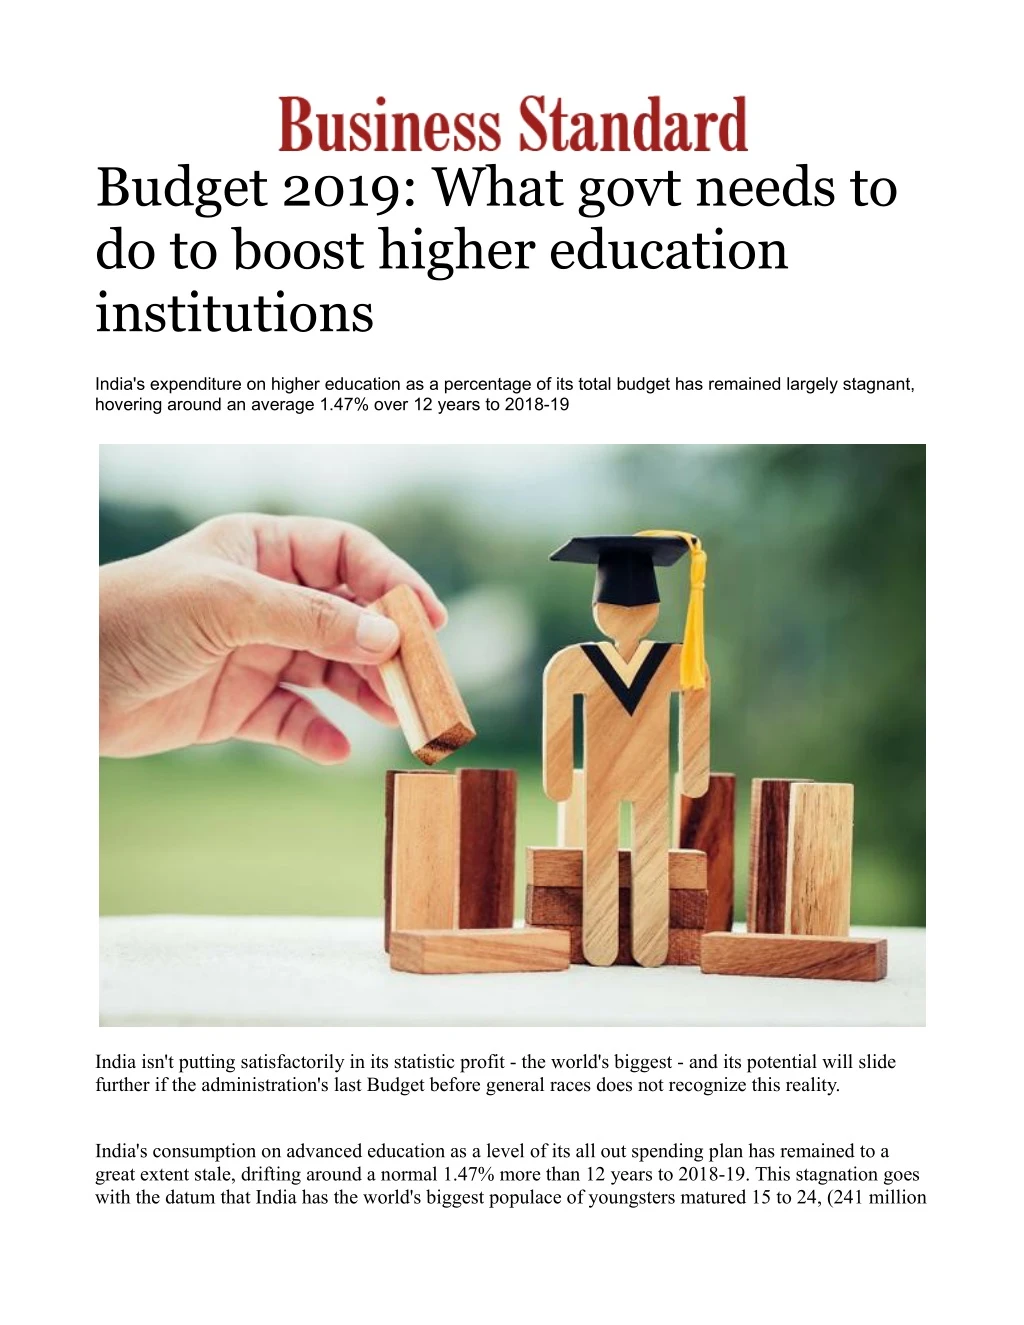 budget 2019 what govt needs to do to boost higher